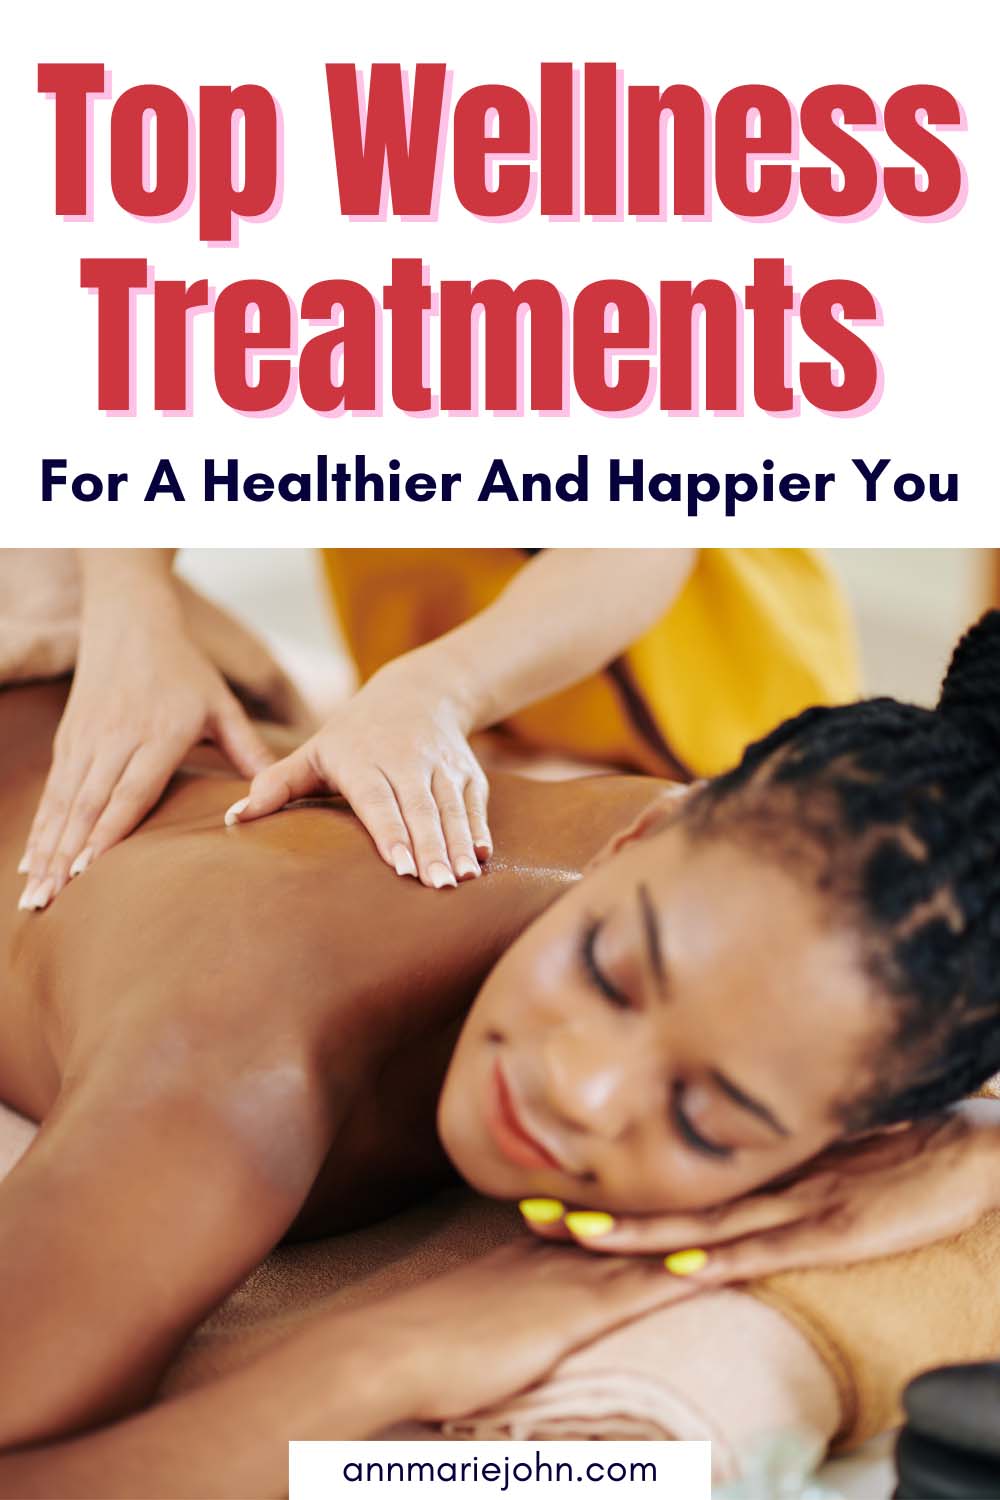 Top Wellness Treatments For A Healthier And Happier You